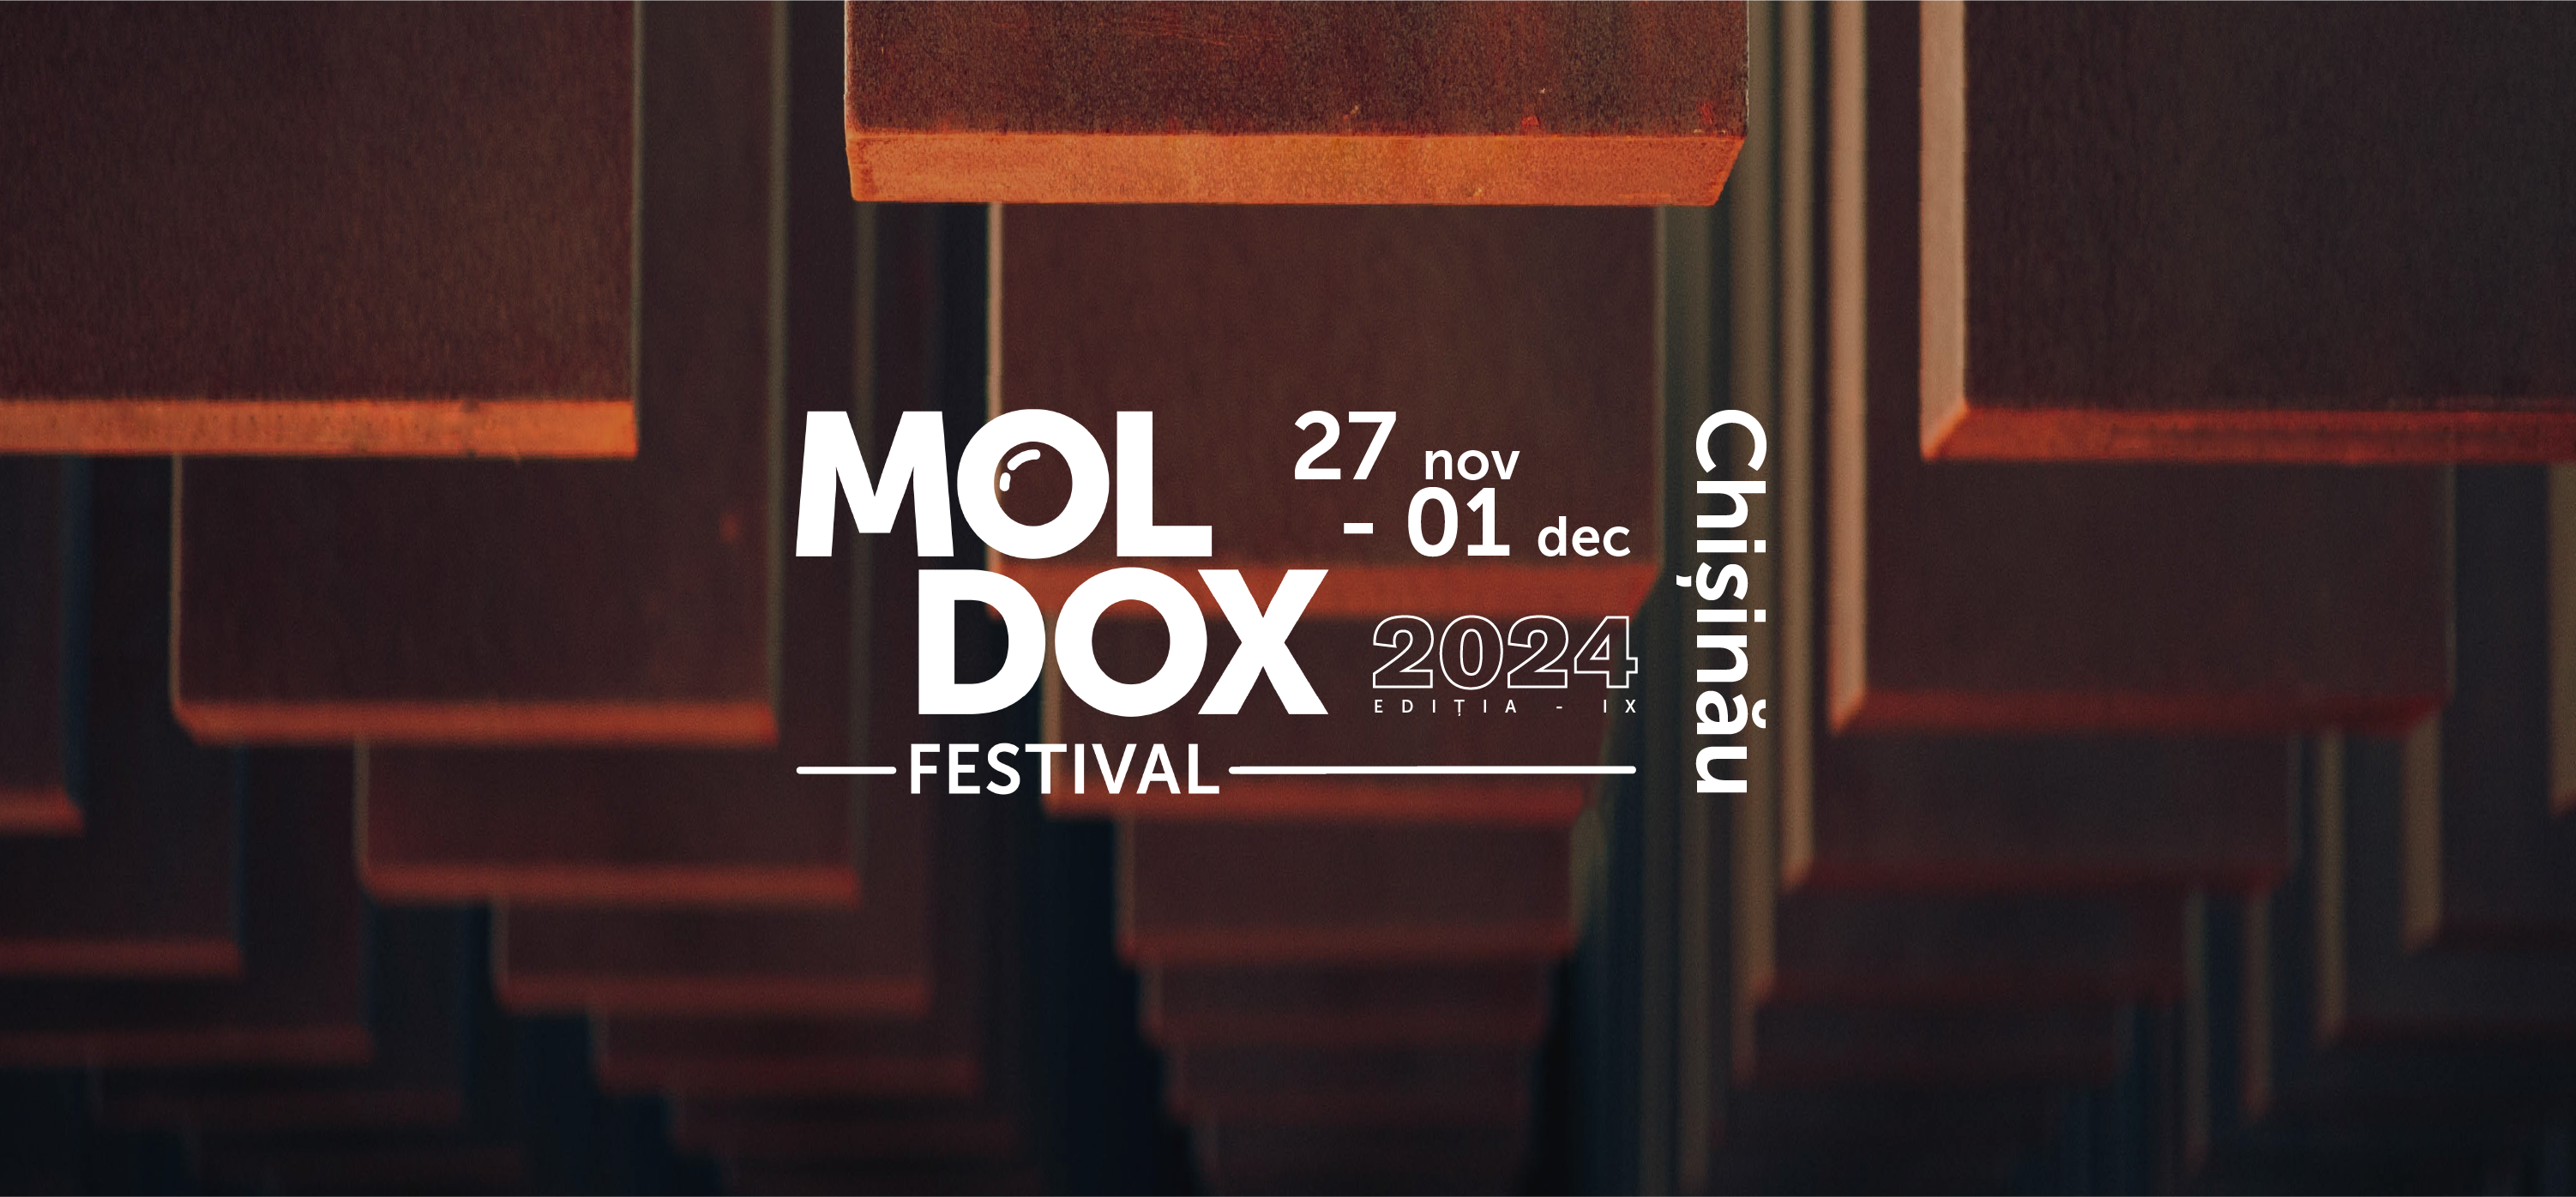 After eight successful editions in Cahul, the MOLDOX Documentary Film Festival is coming to Chișinău